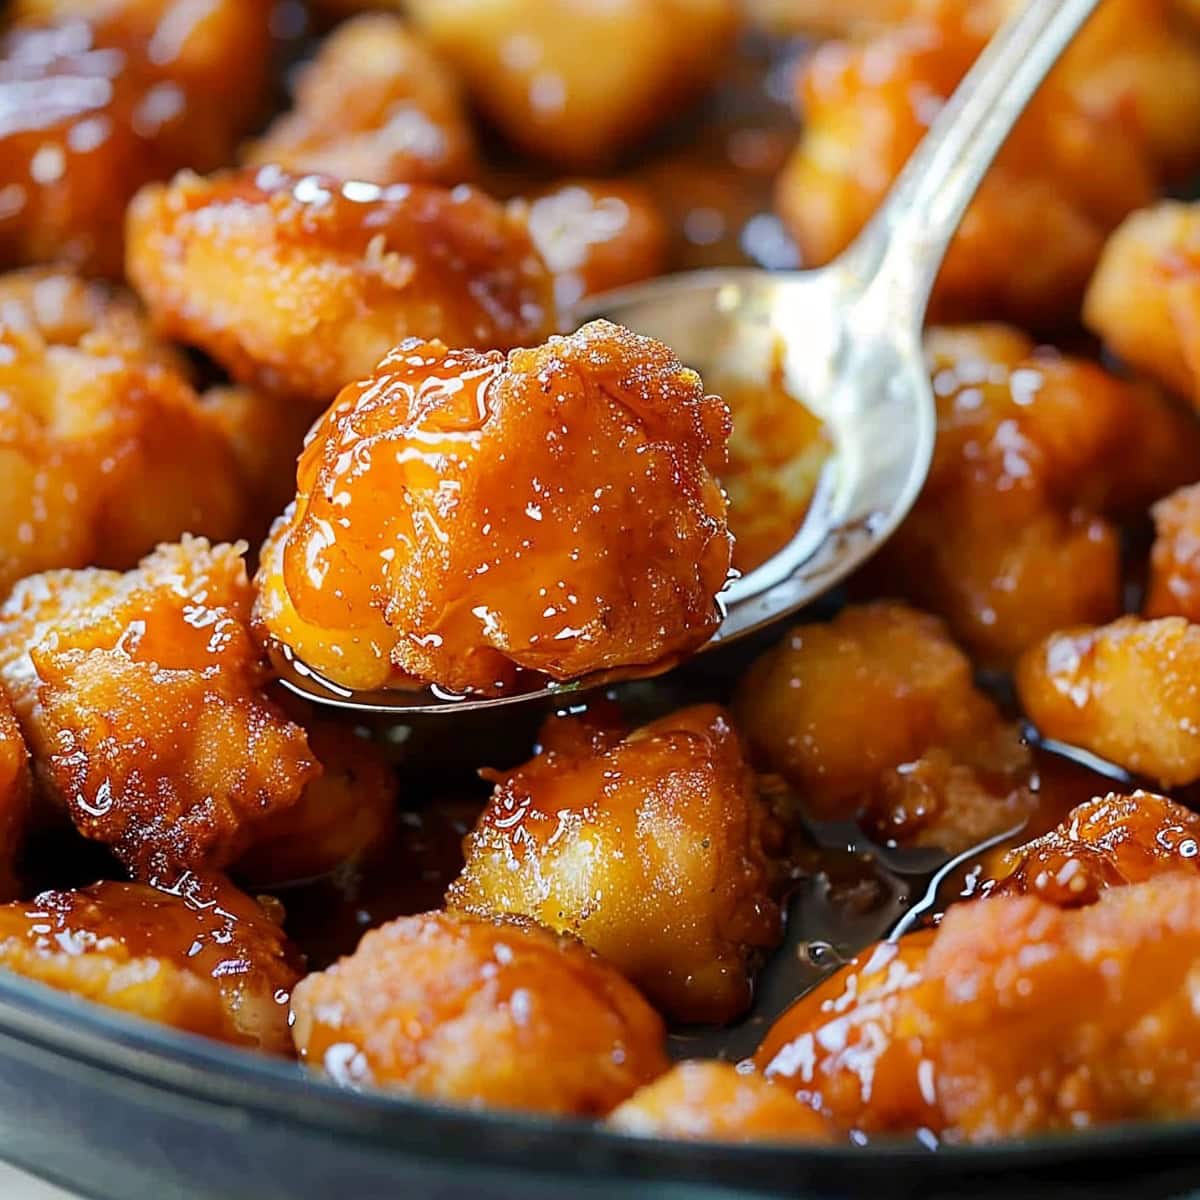 Sweet and Sour Chicken Balls in the Frying Pan with a Spoon Holding Up One Piece of Saucy Chicken